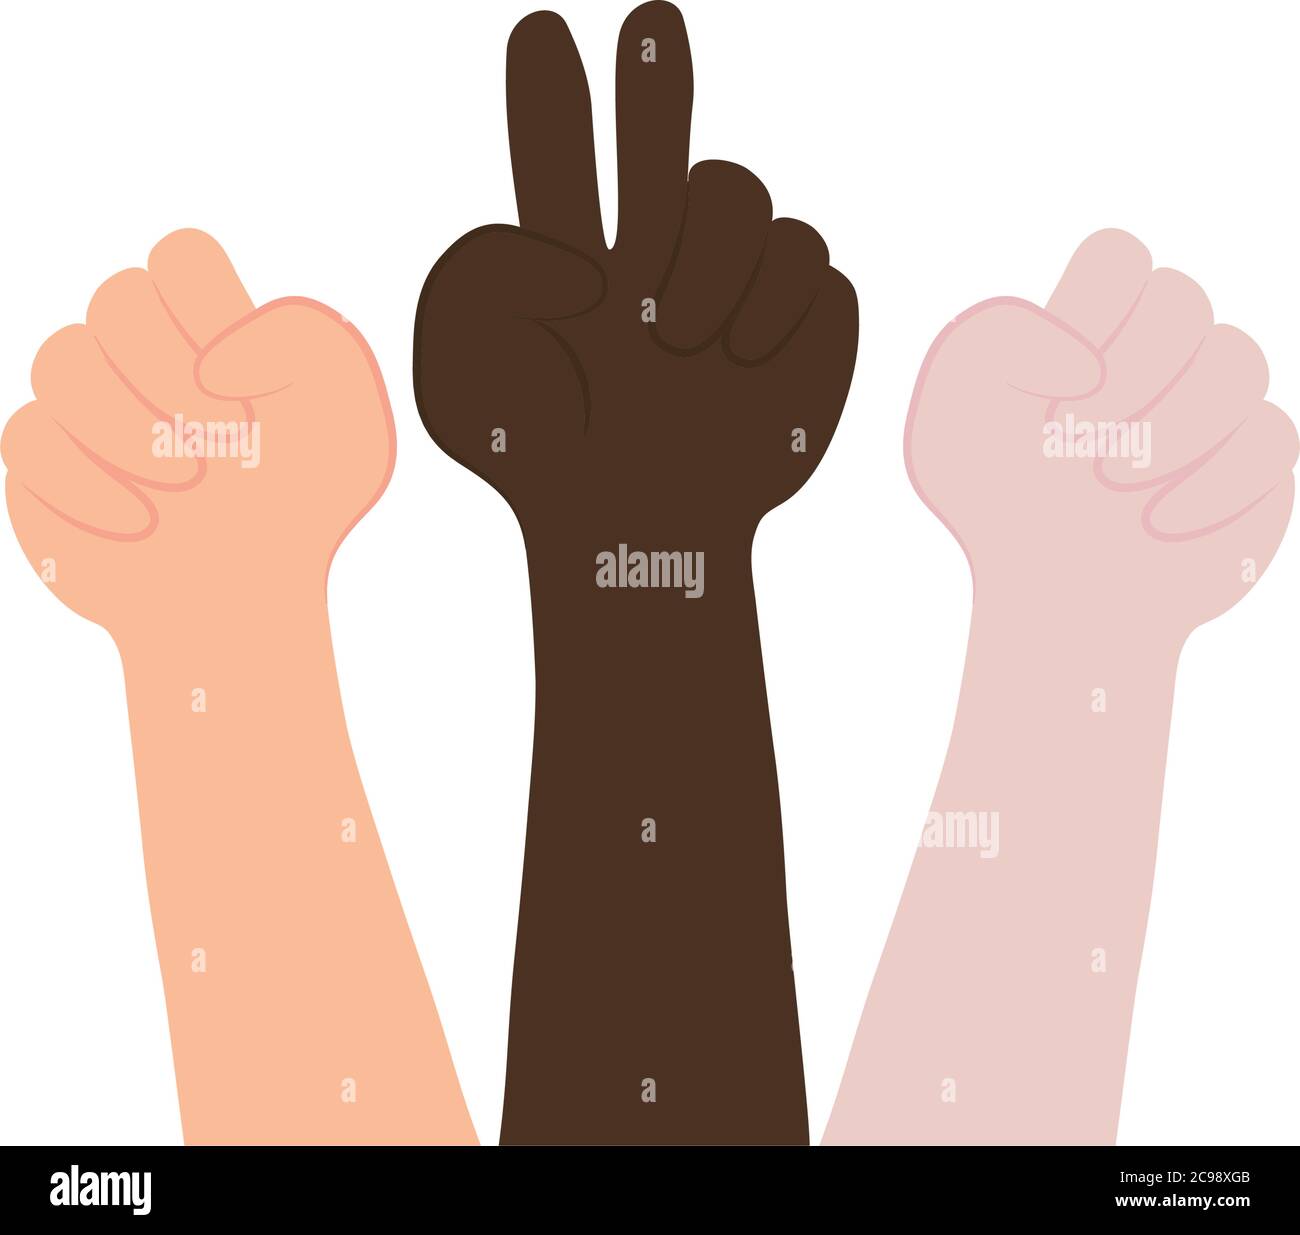 icon of hands with protesting gestures over white background, flat style, vector illustration Stock Vector